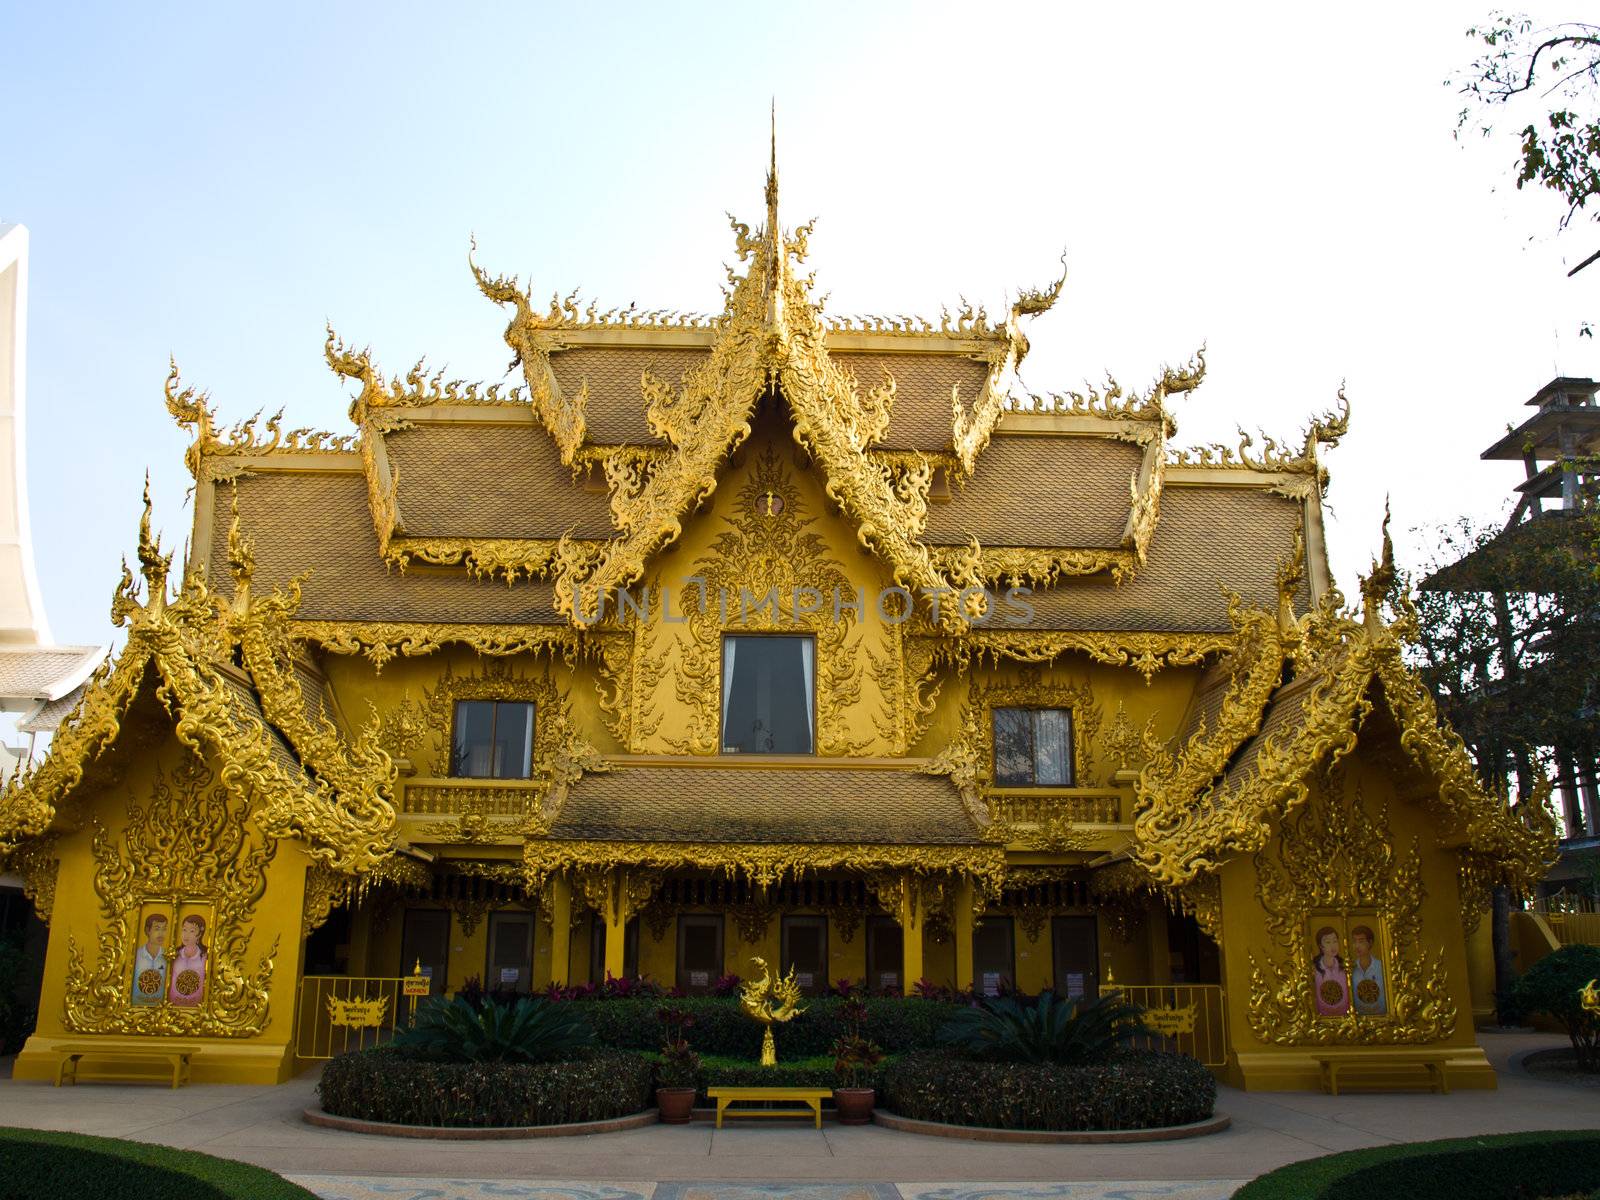 Facade of golden toilet, Wat Rong Khun at Chiang Rai, Thailand
any kind of art decorated in Buddhist church, temple etc.They are public domain or treasure of Buddhism, no restrict in copy of use.